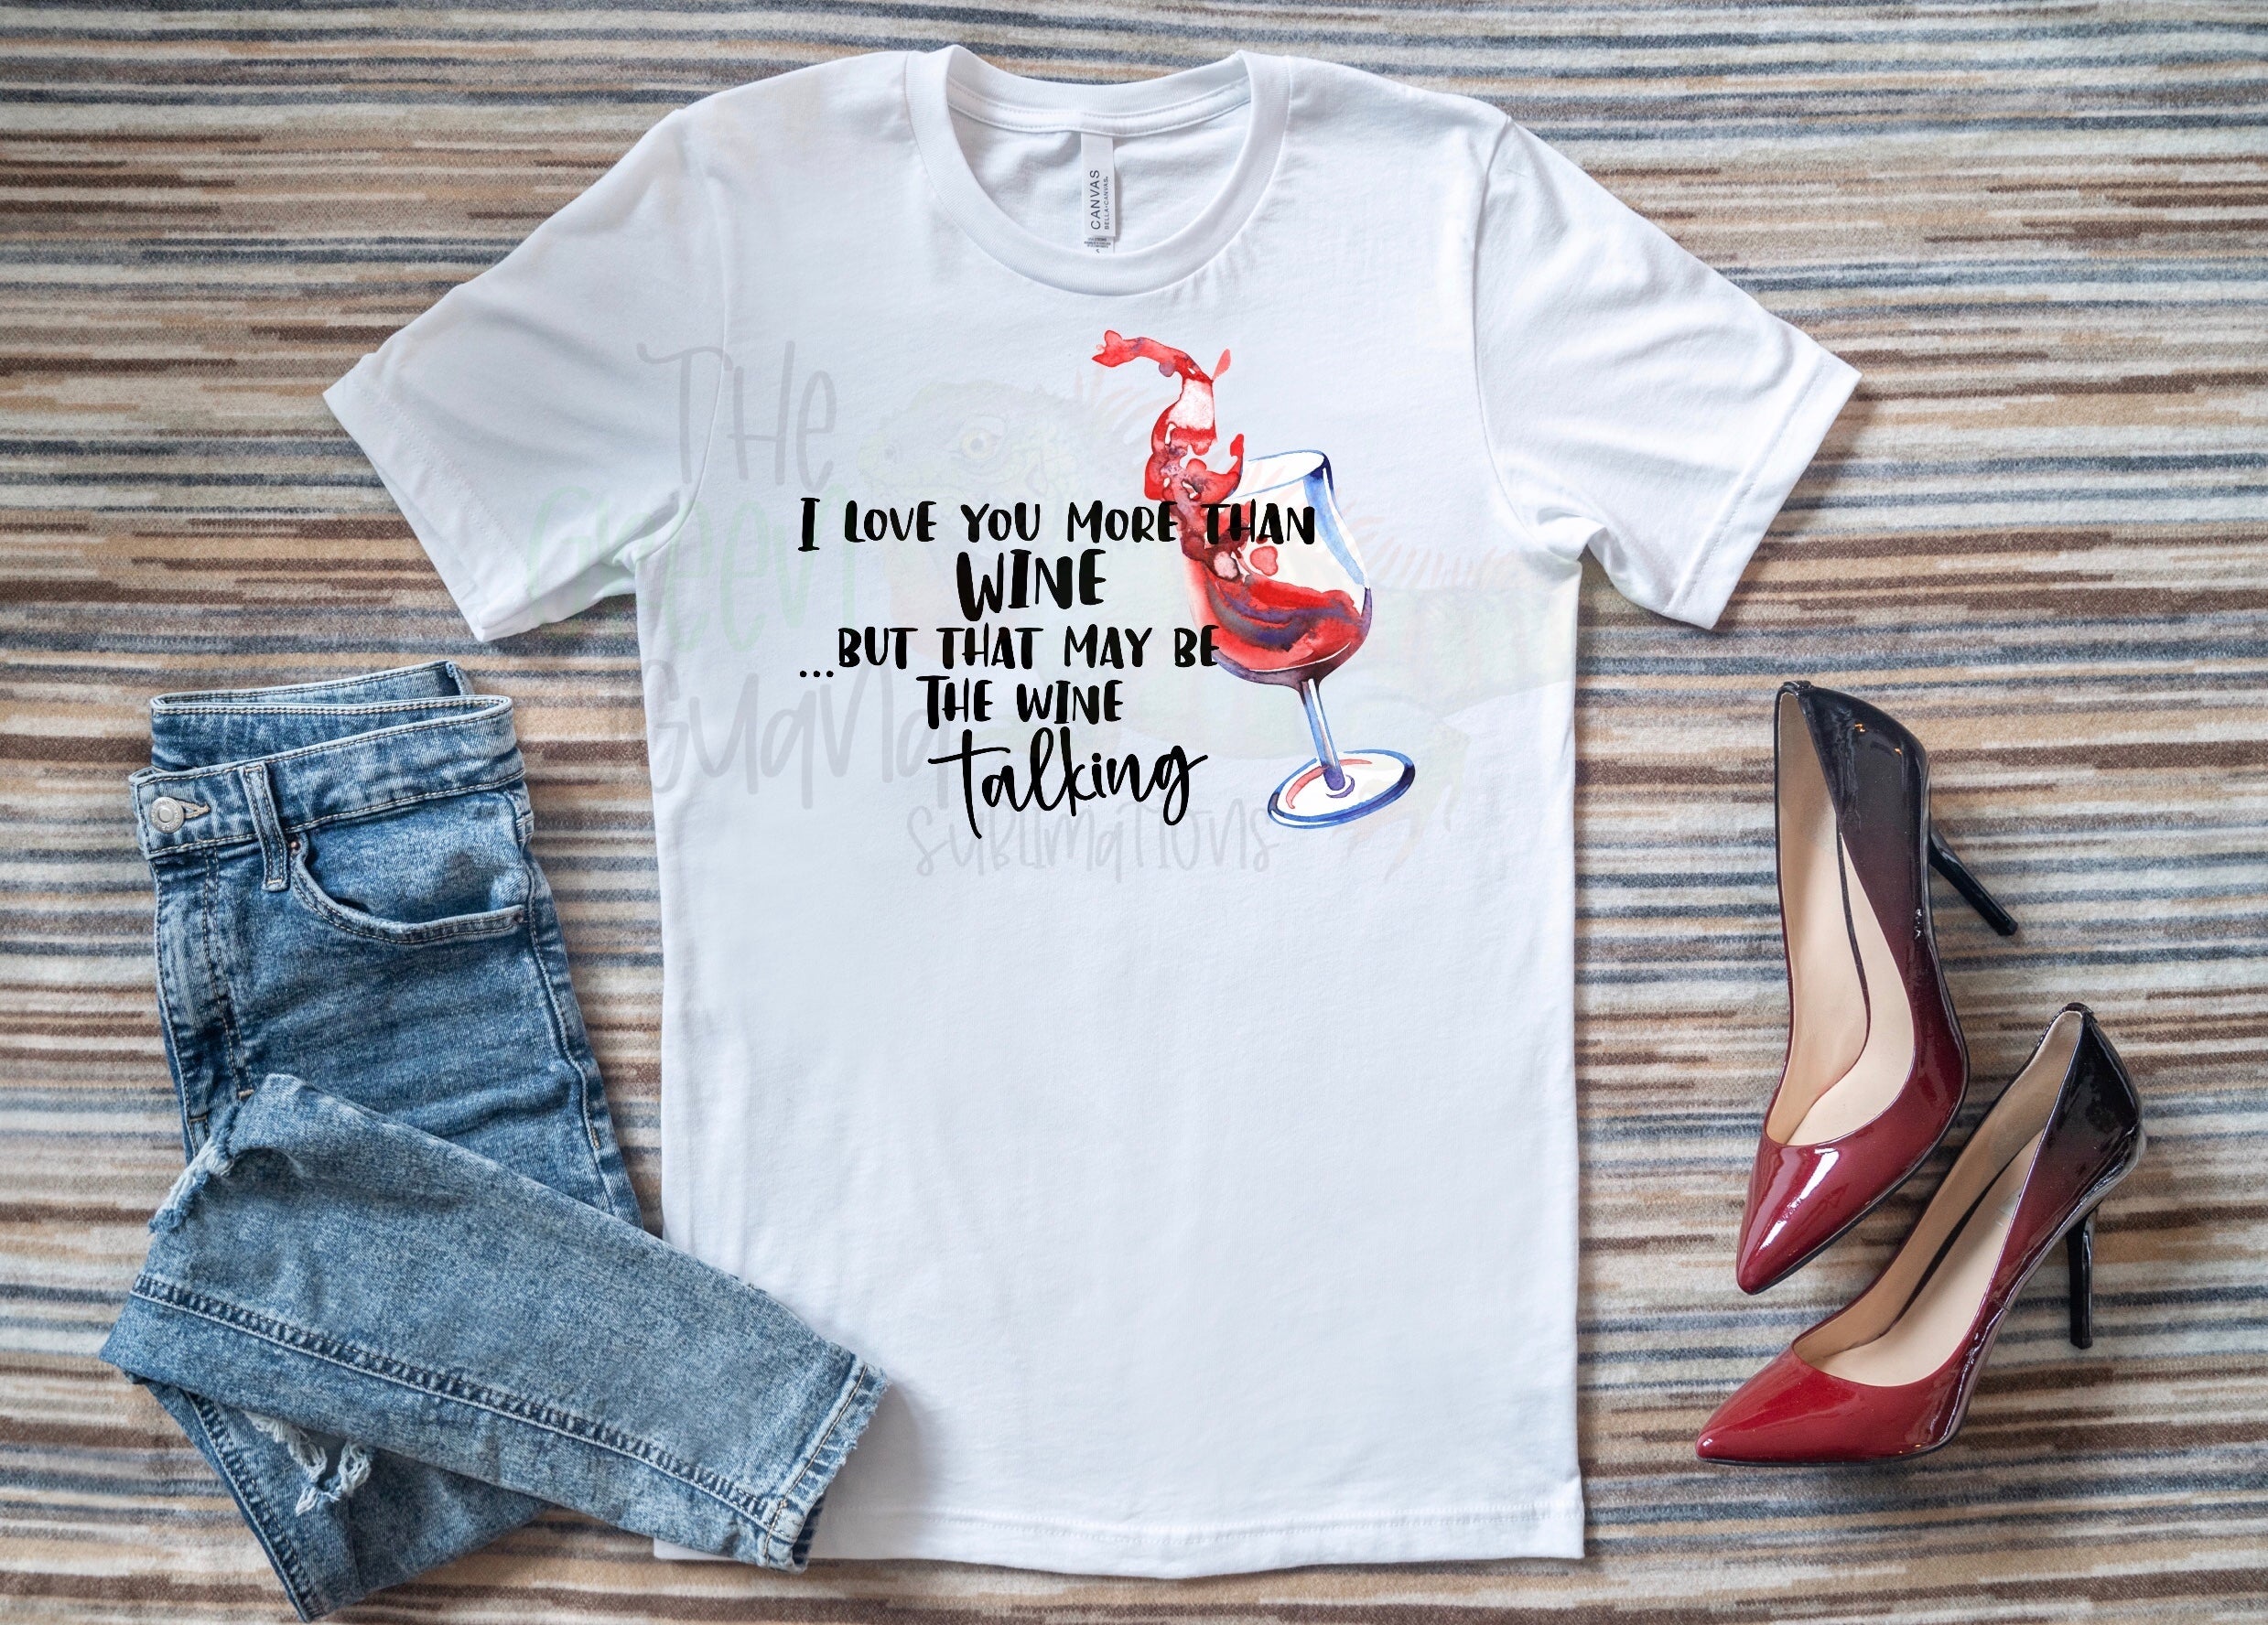 I love you more than wine...but that may be the wine talking DTF transfer